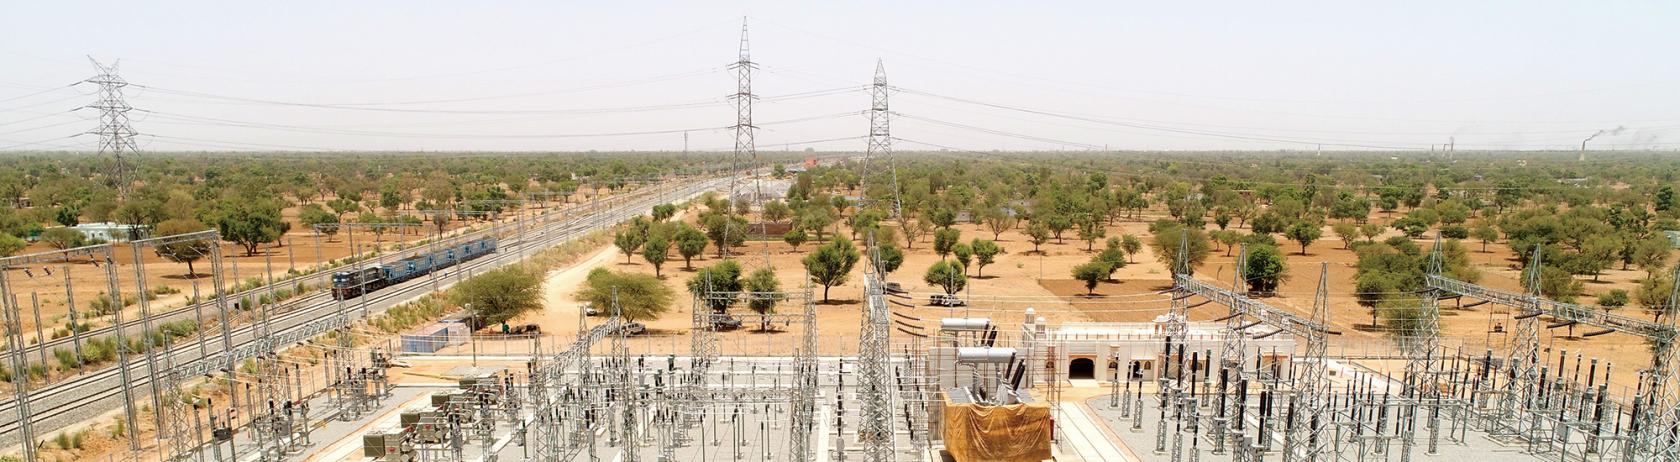 Substation built in a desert beside a railroad; To ensure stable power supply, substations are built equidistantly within a total distance of 1,500km.